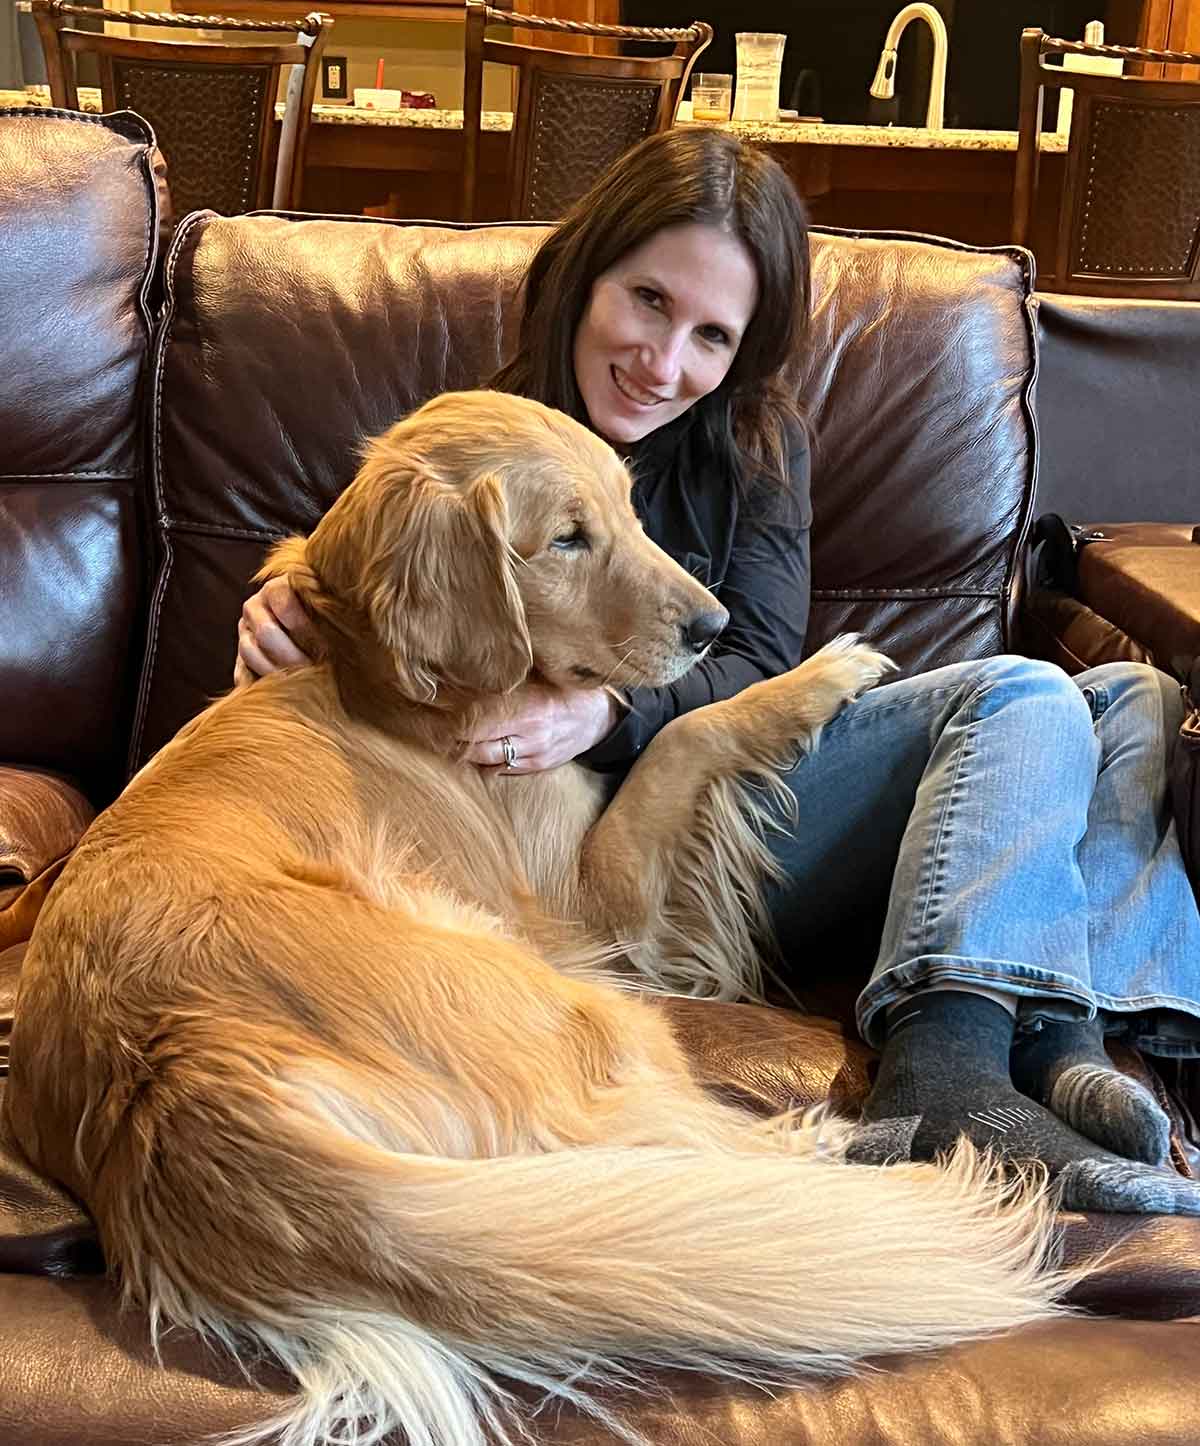 Woman snuggling with a golden retriever on a reclining couch.